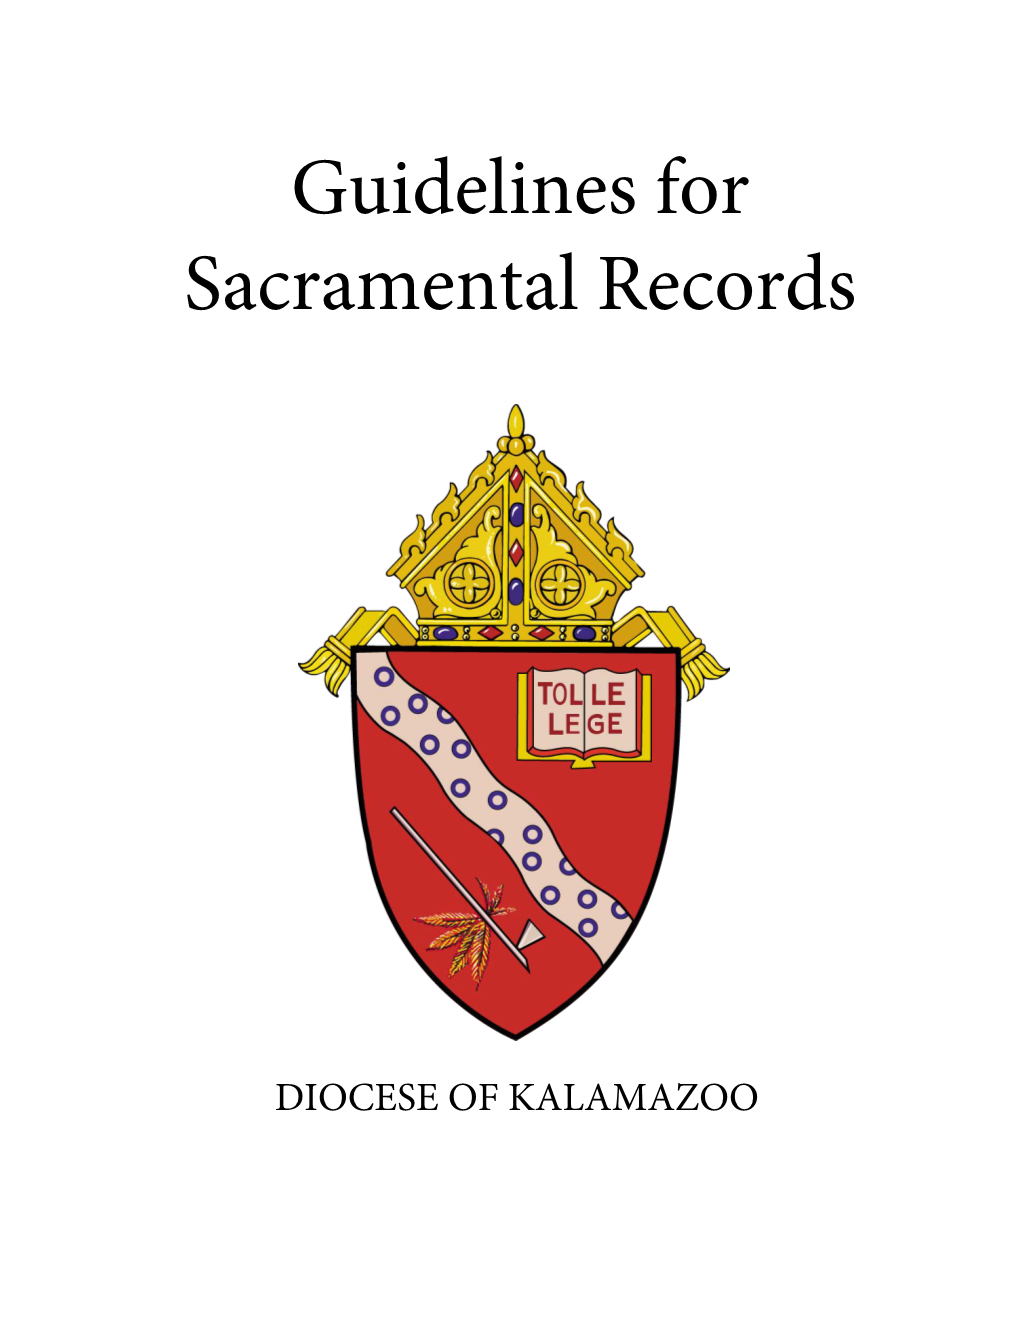 Guidelines for Sacramental Records